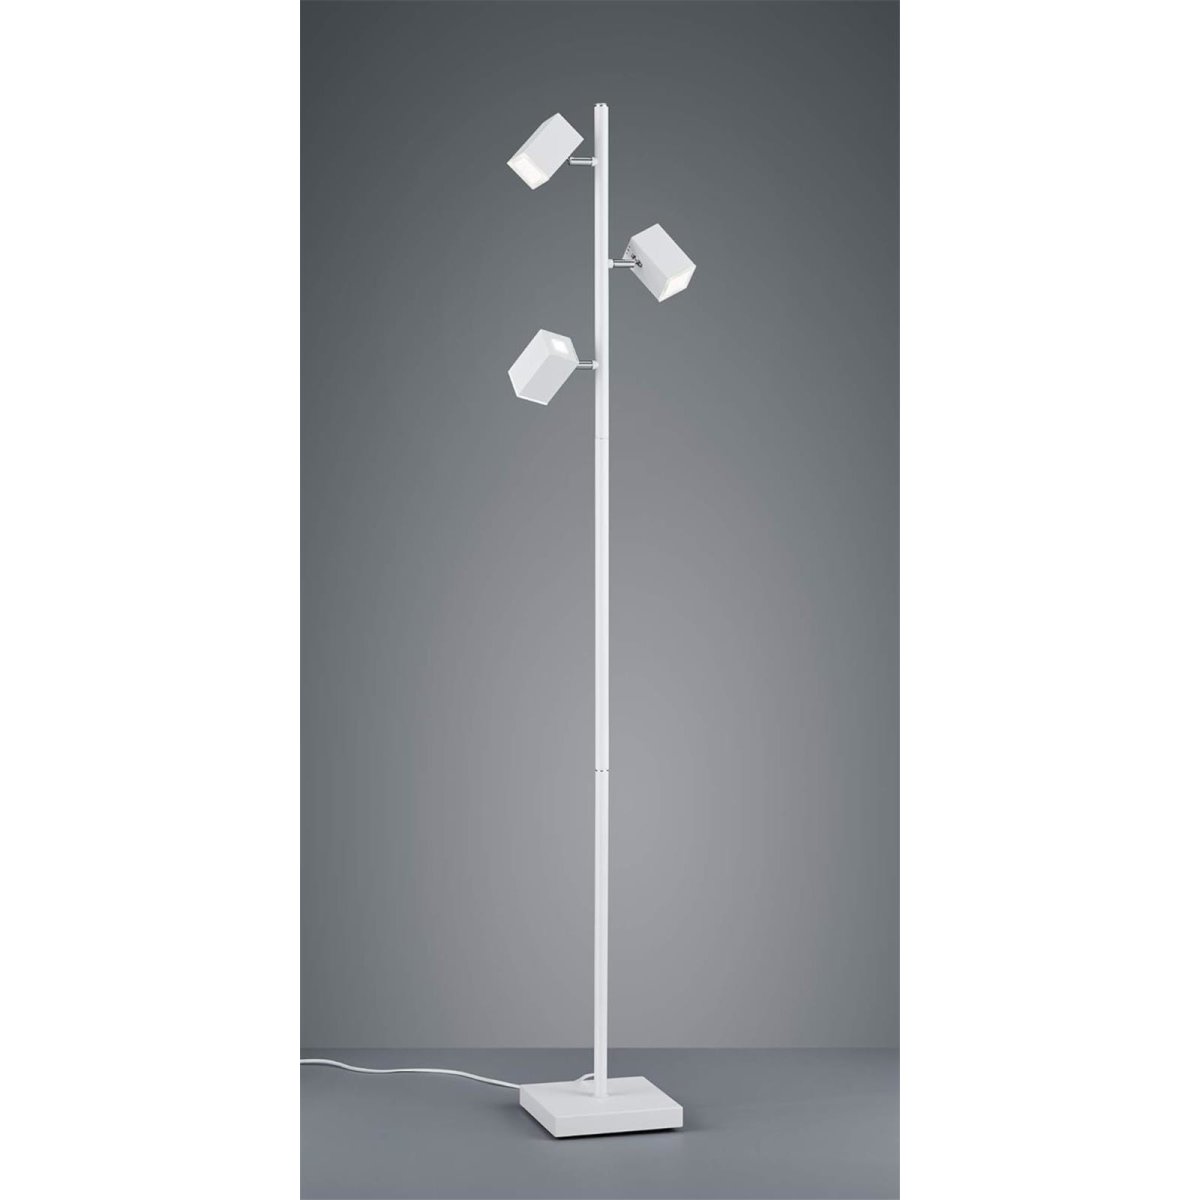 Sc, Stehlampe Stehleuchte Spots Trio € 3-flammig Dimmbar 14,1W 69,00 Lagos LED